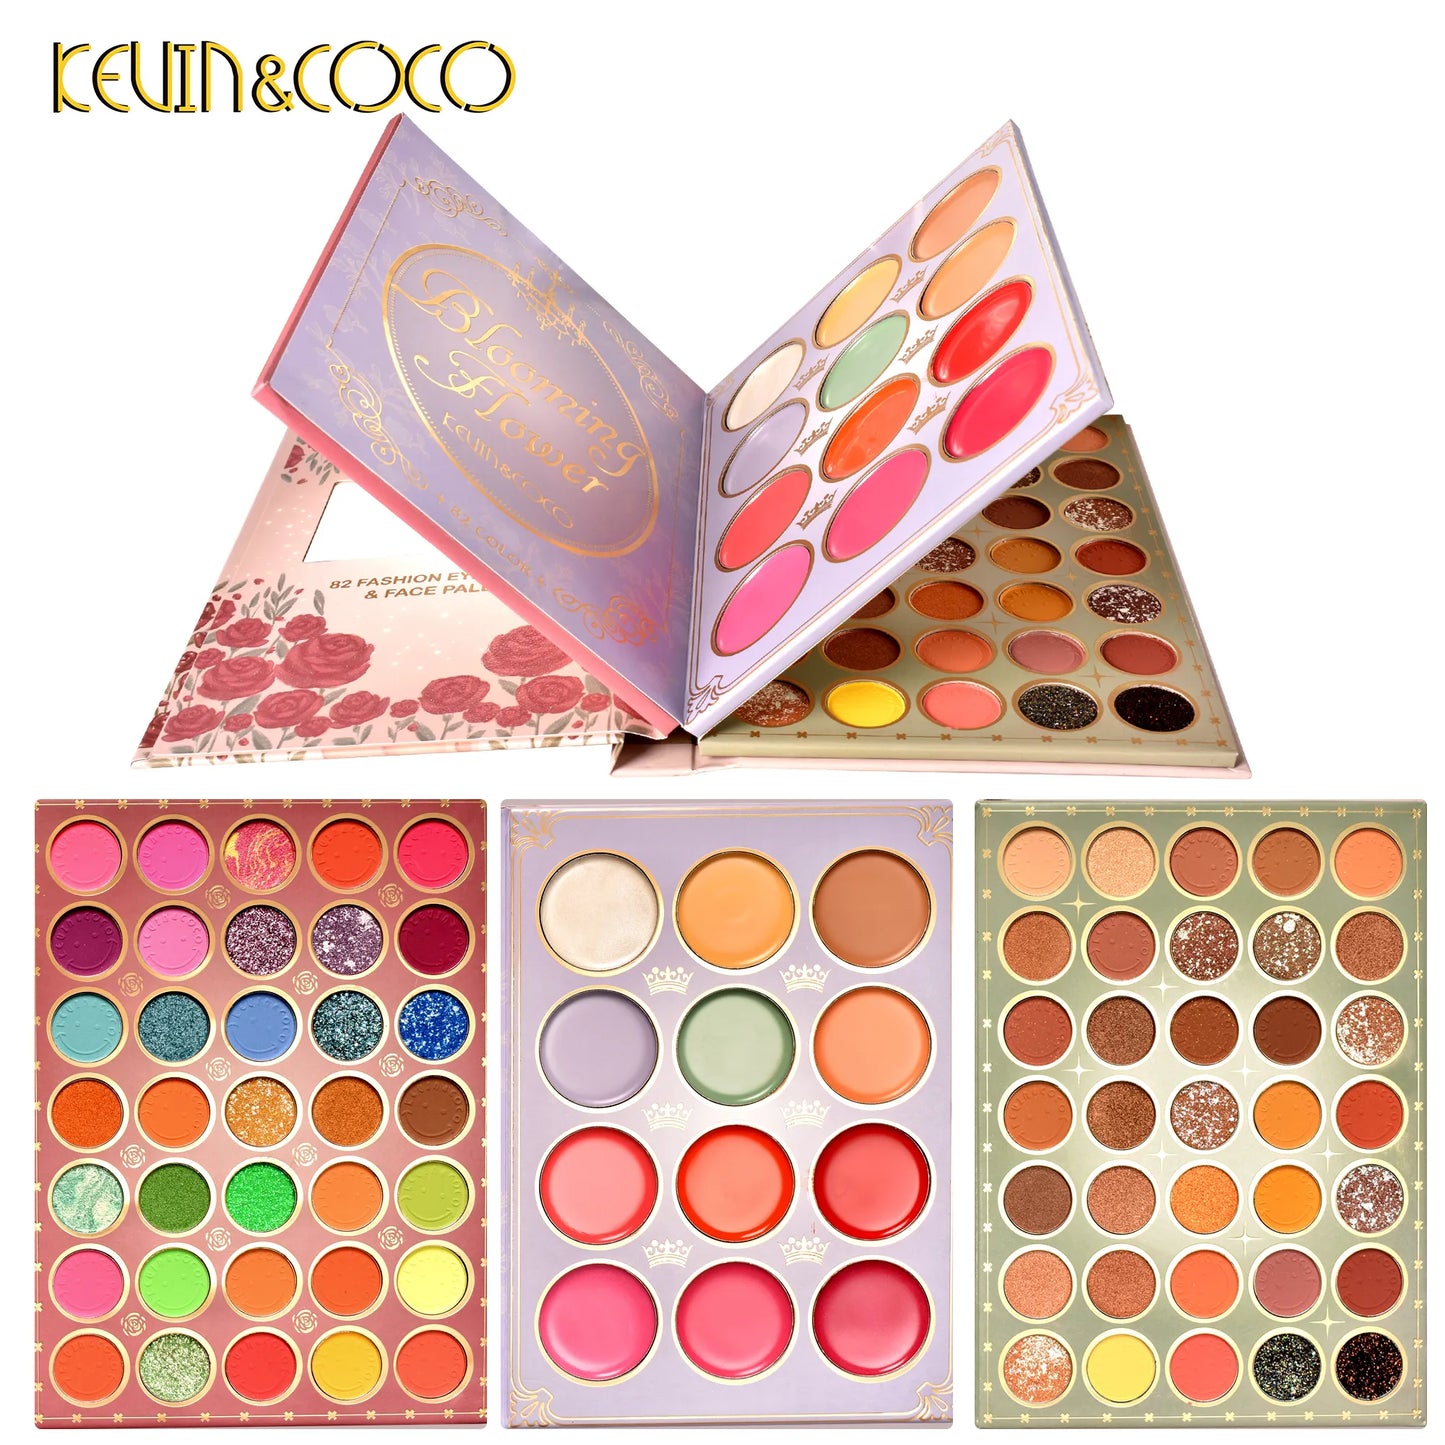 KEVIN&COCO 82 COLORS FACE PALETTE RED ROSES KC221386 R25